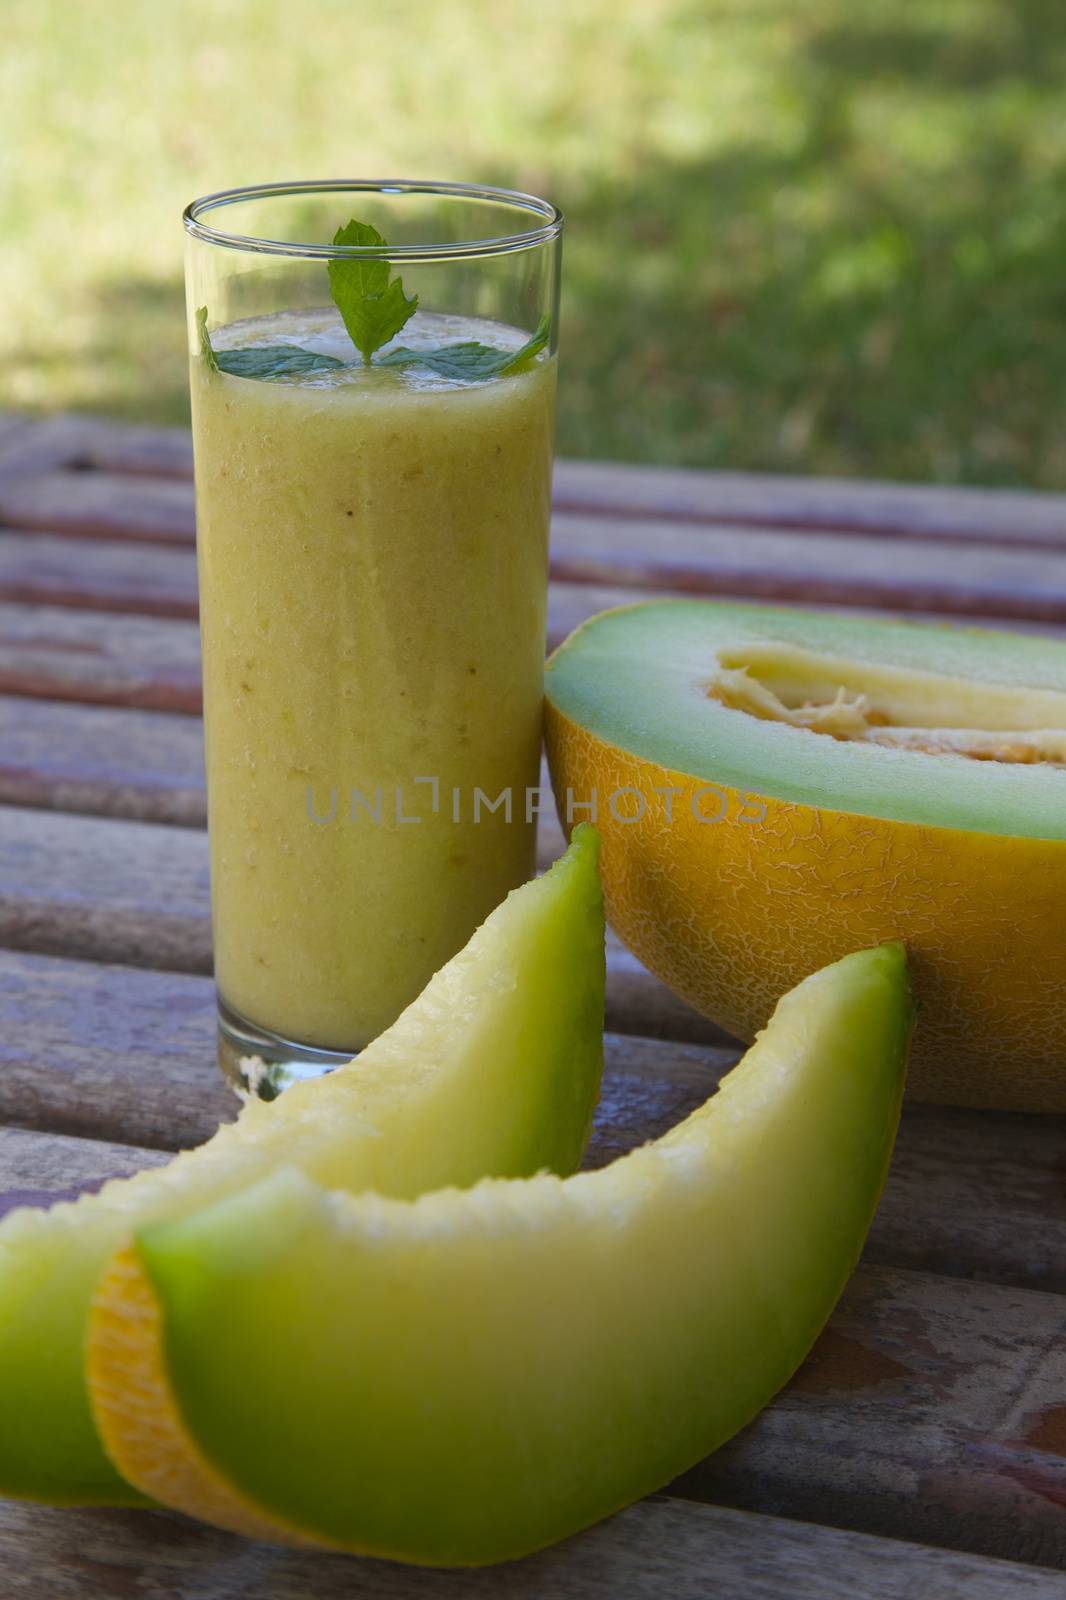 Melon smoothie with fresh peppermint leaves by tolikoff_photography